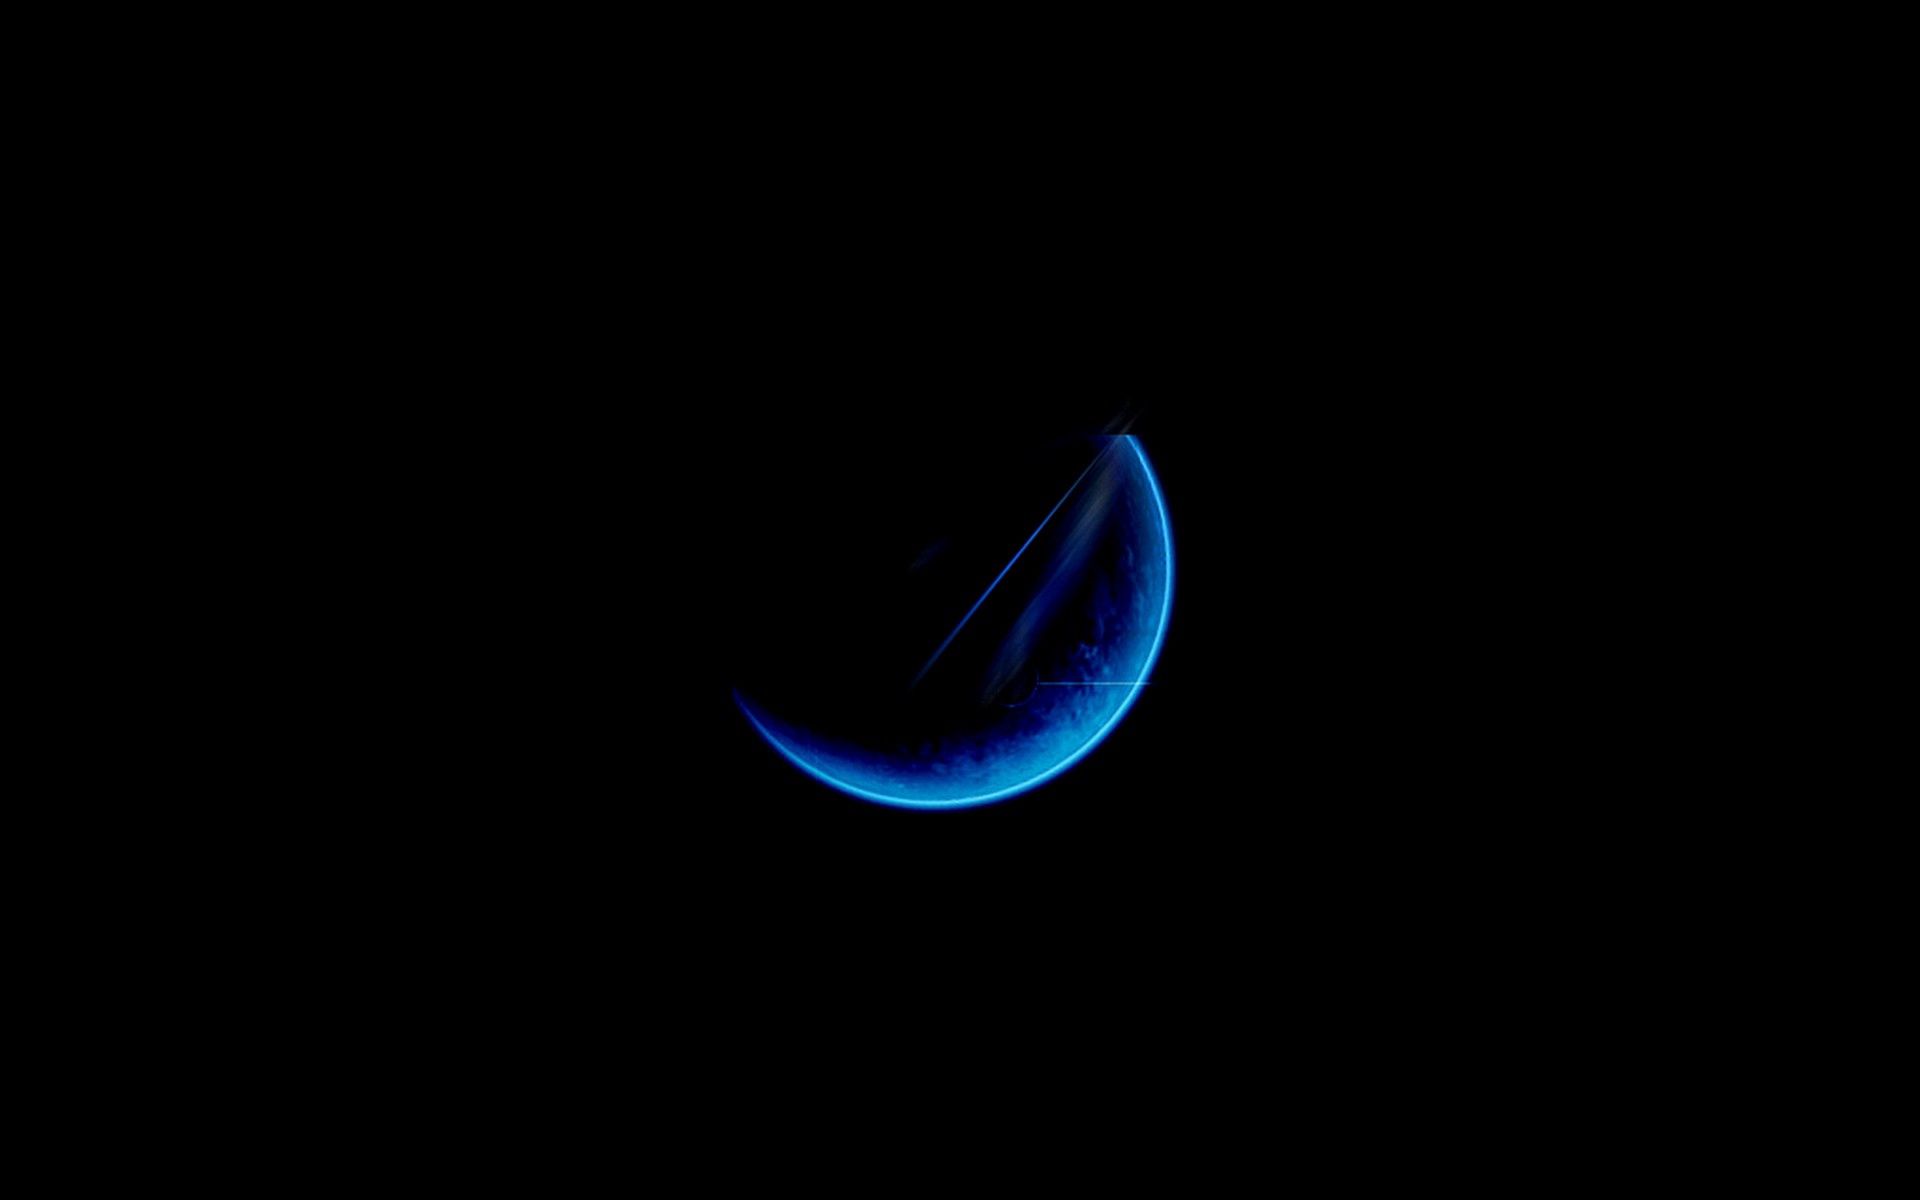 shine, blue, moon, black collection of HD images